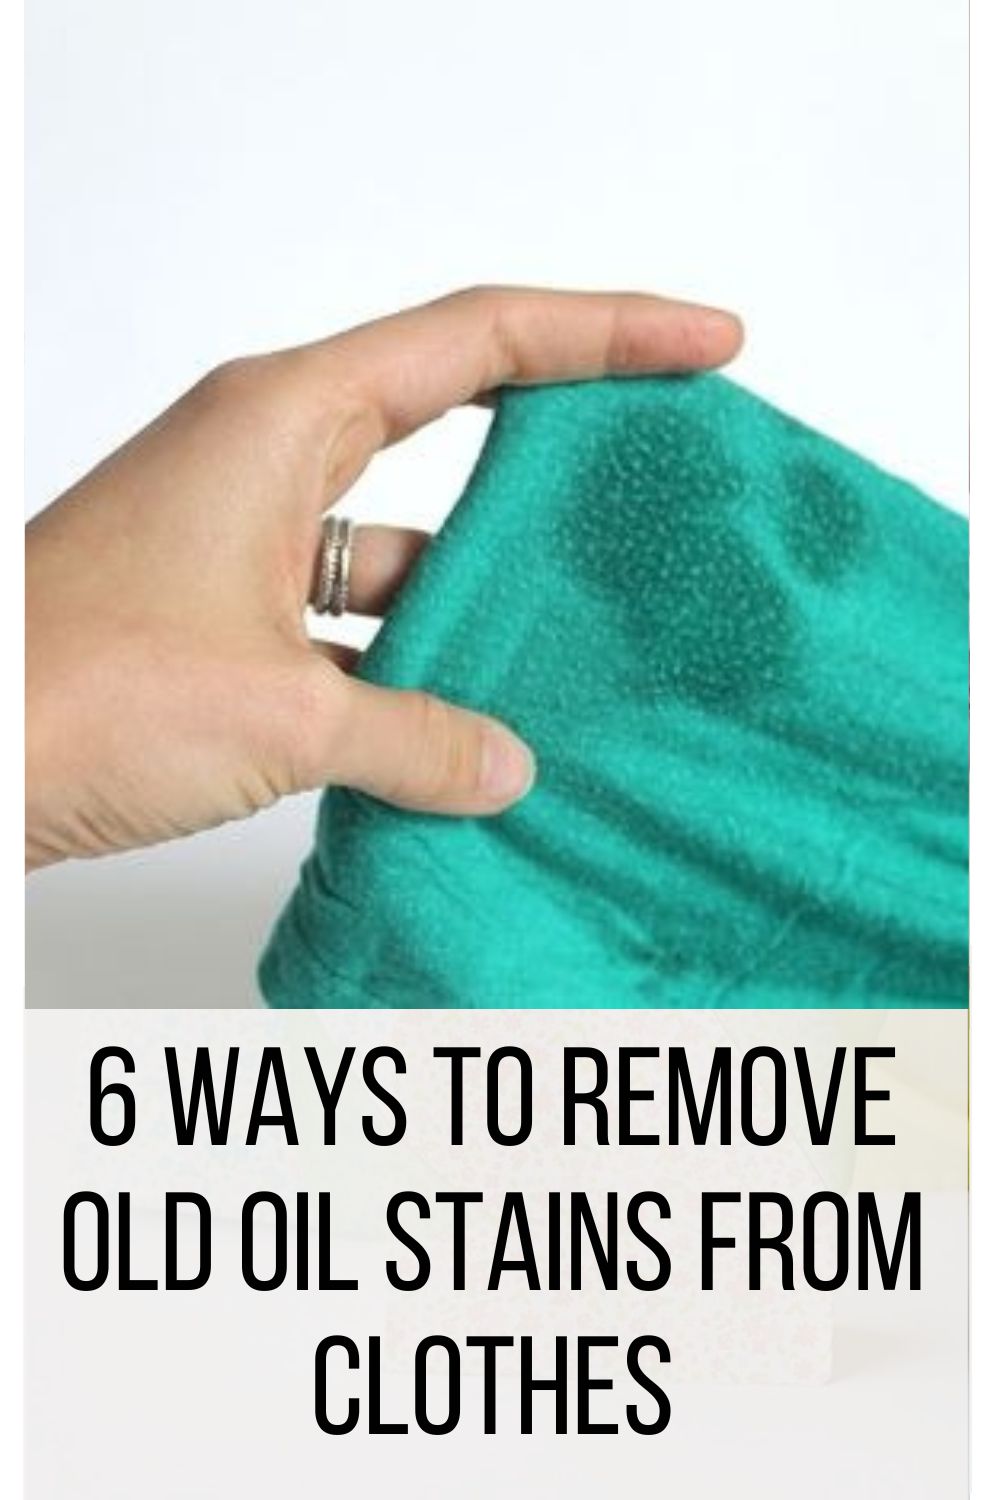 6 Ways to Remove Old Oil Stains From Clothes